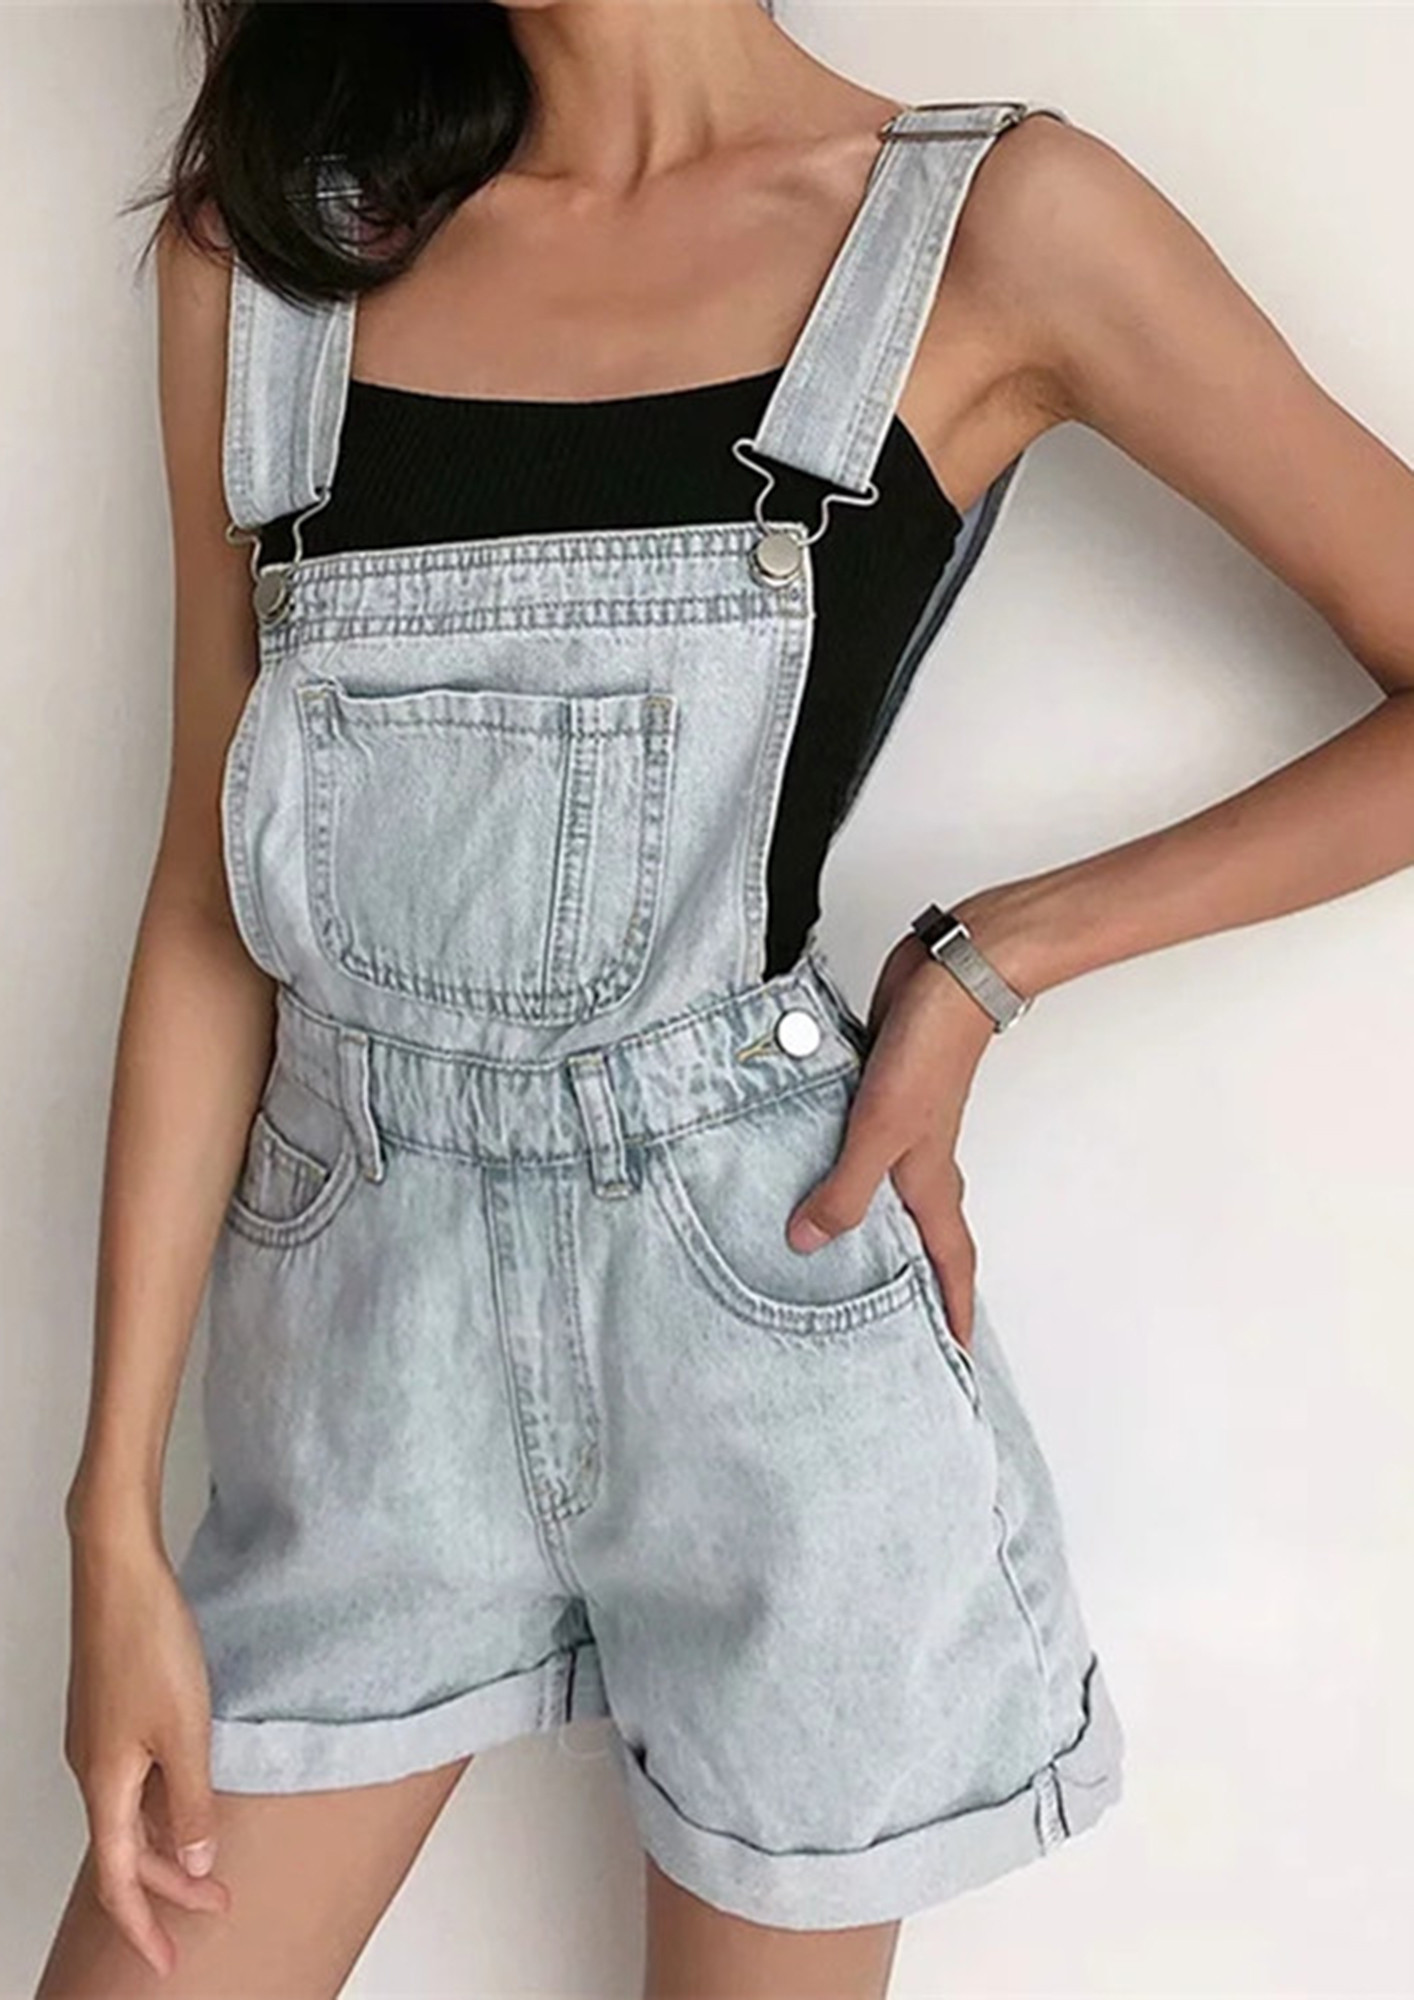 Country Road Denim Pinafore Dress – The Turn